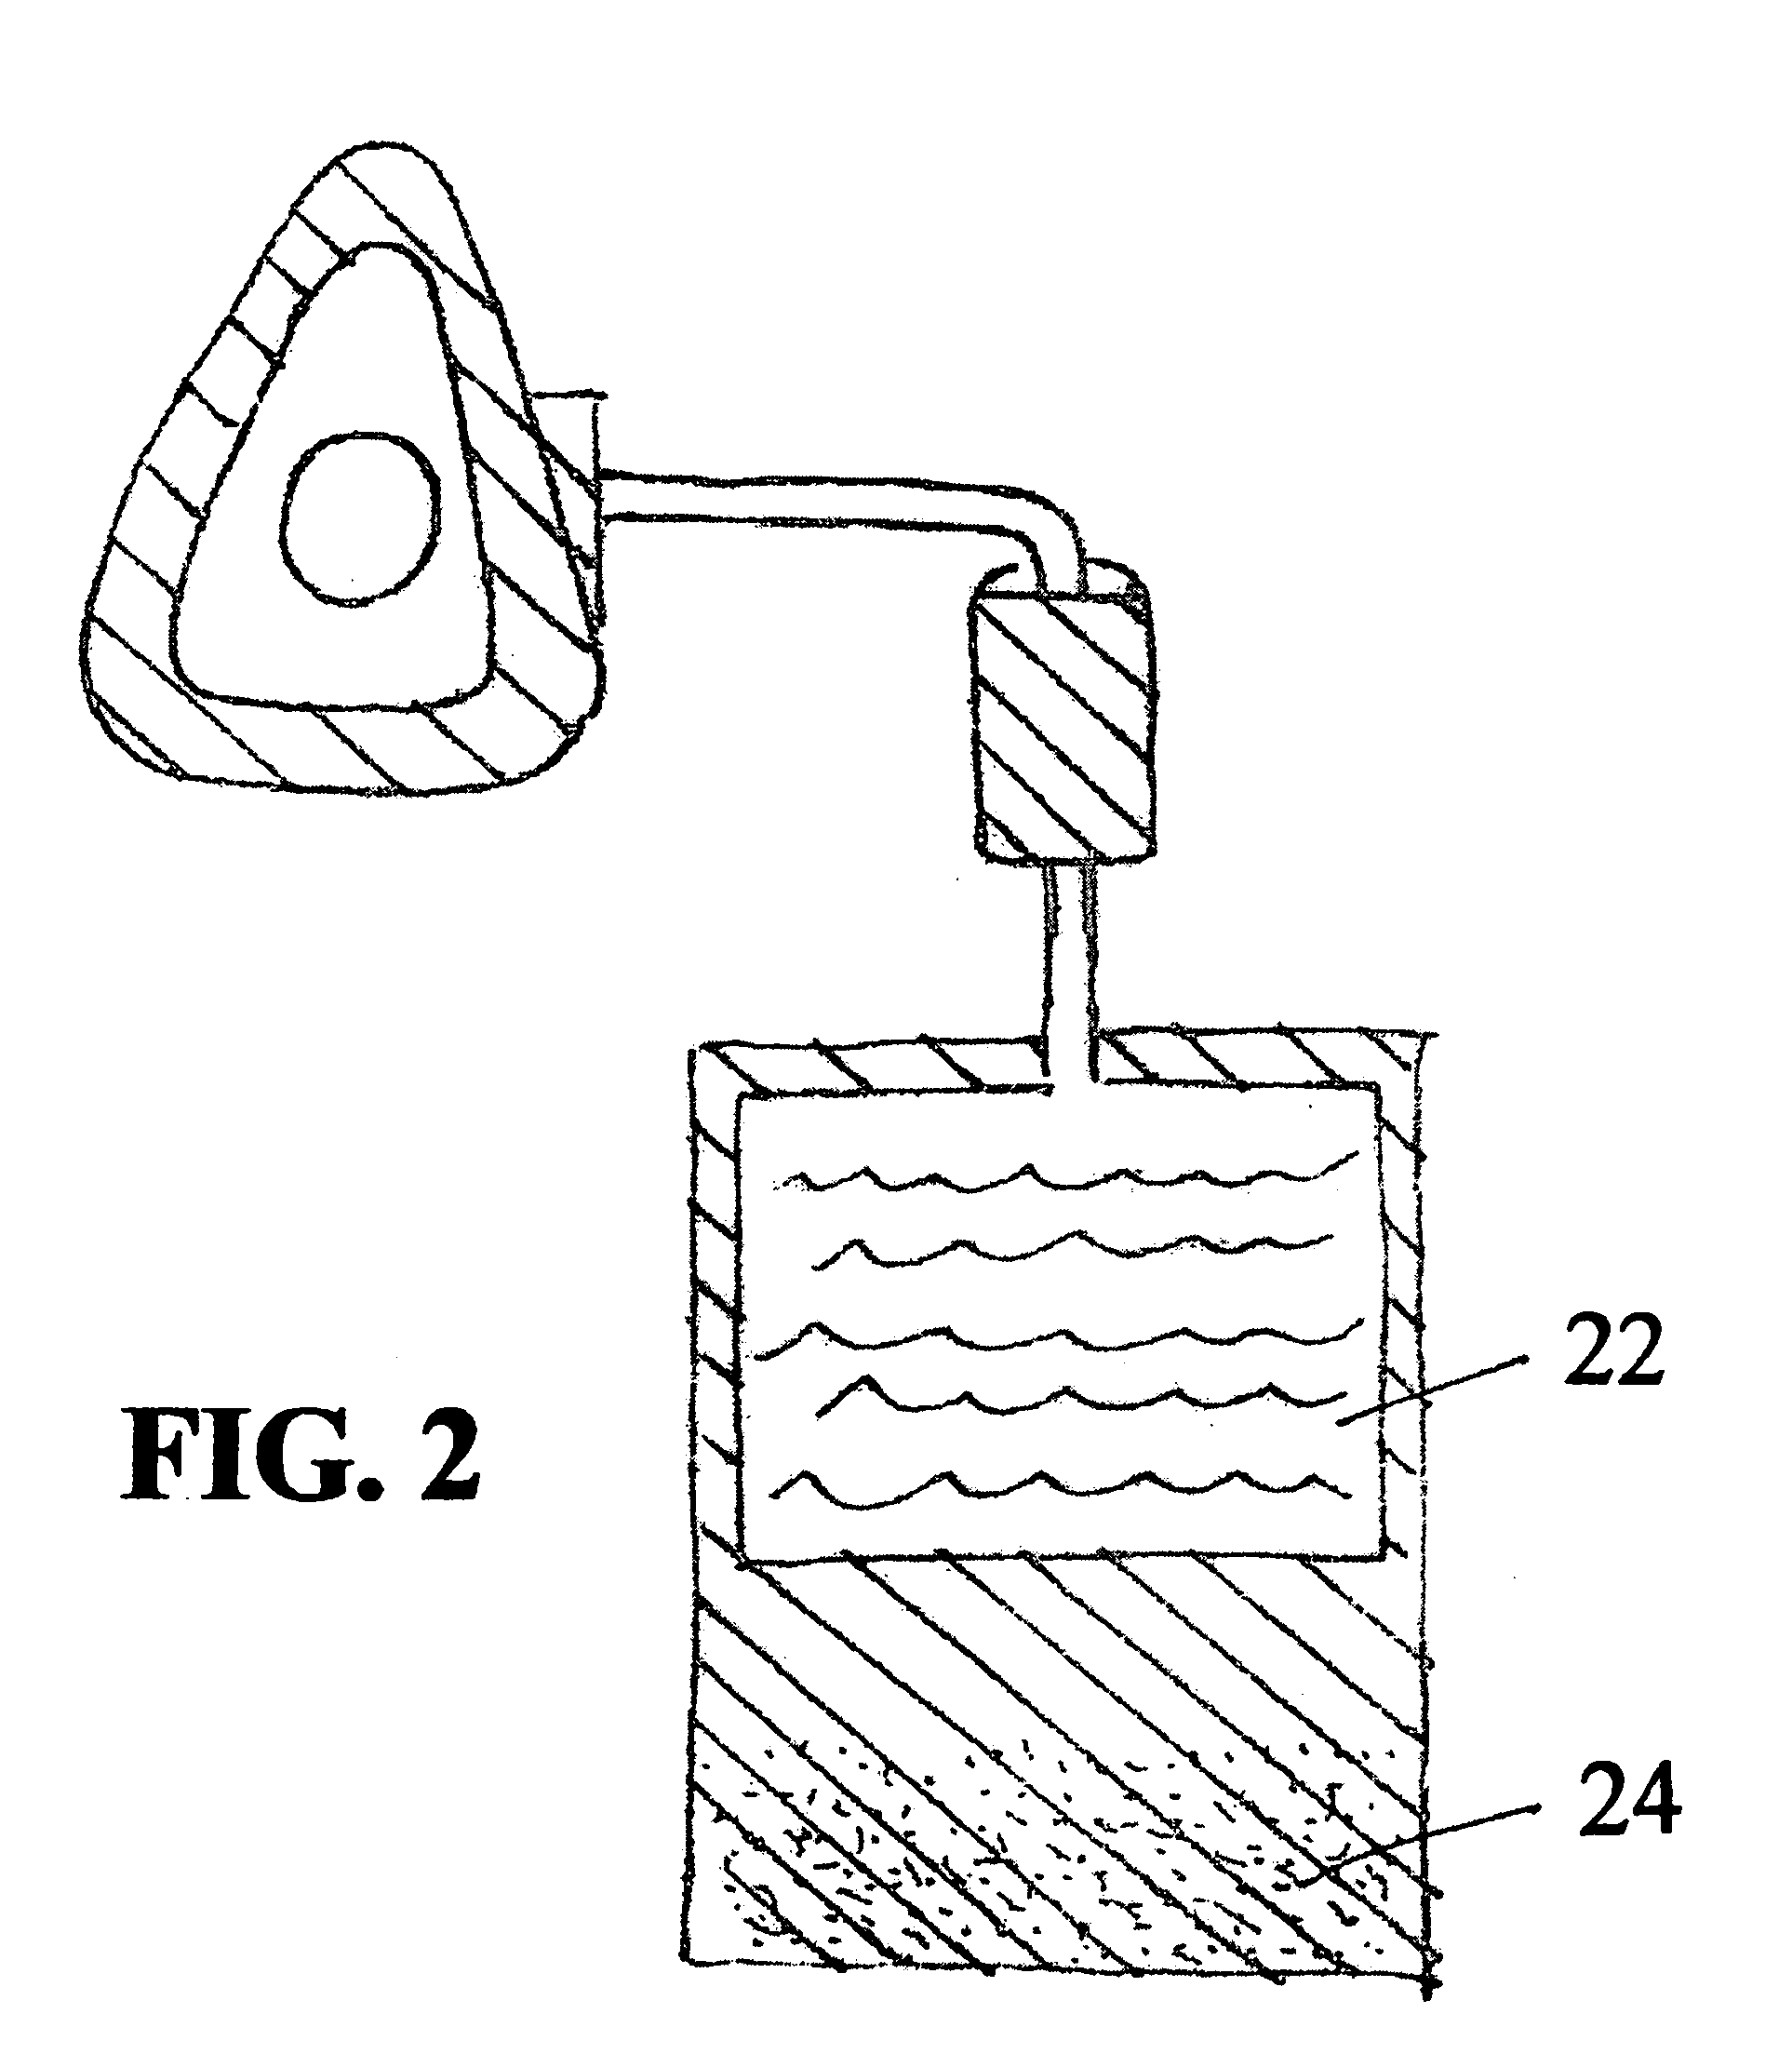 Apparatus and Methods of Providing Diatomic Oxygen (O2) Using Ferrate(VI)-Containing Compositions